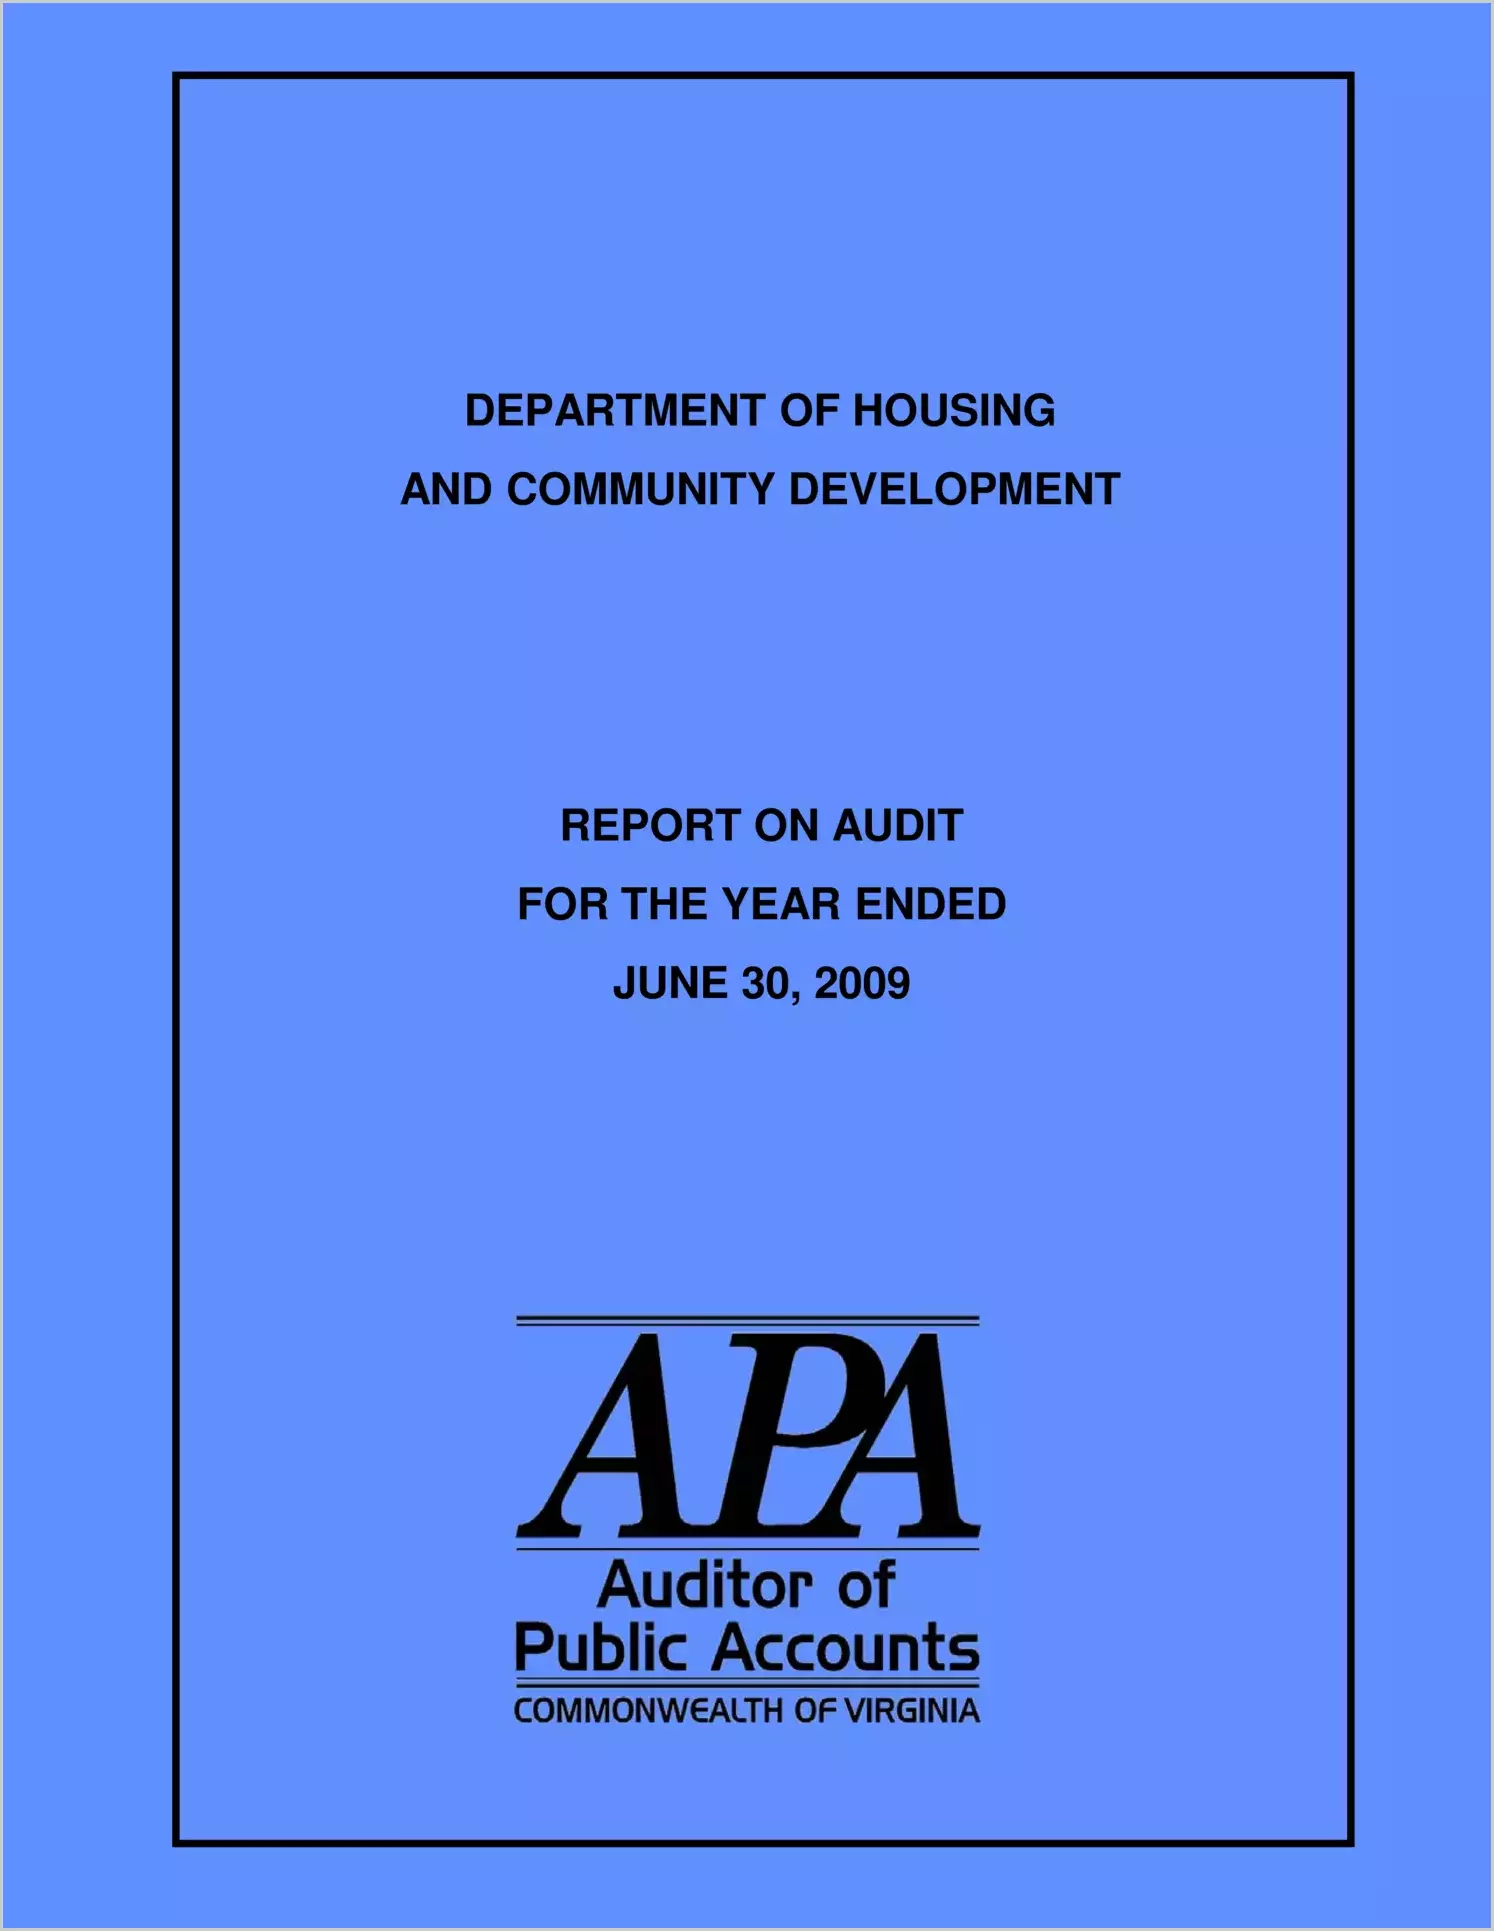 Department of Housing and Community Development report on audit for the year ended June 30, 2009